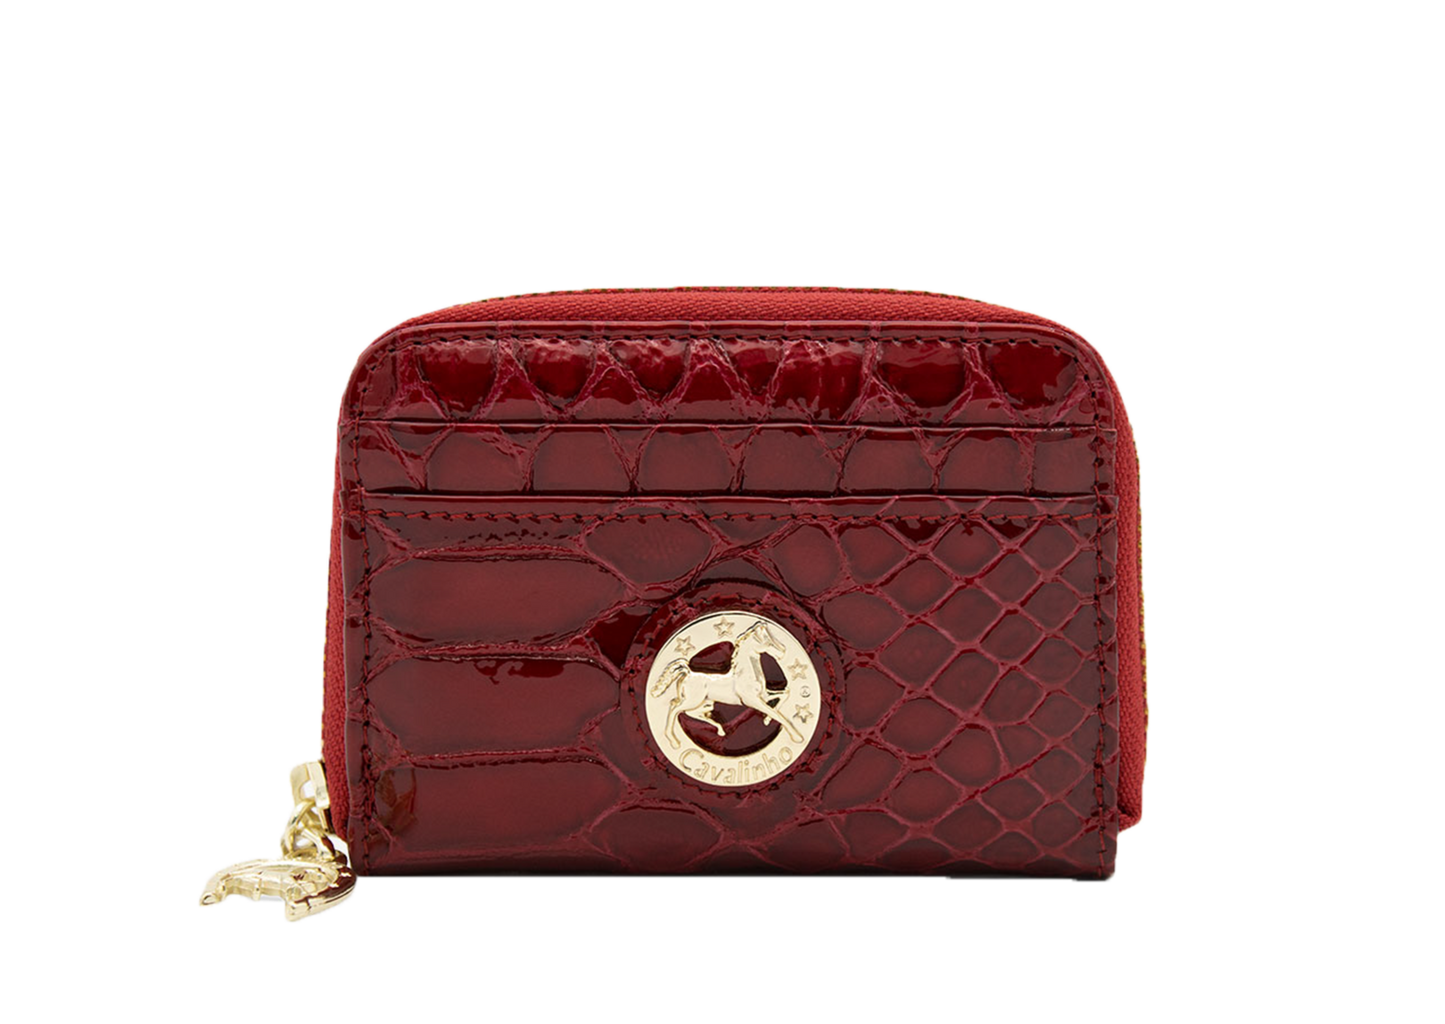 Cavalinho Gallop Patent Leather Card Holder - Red - Galope_1Asset1